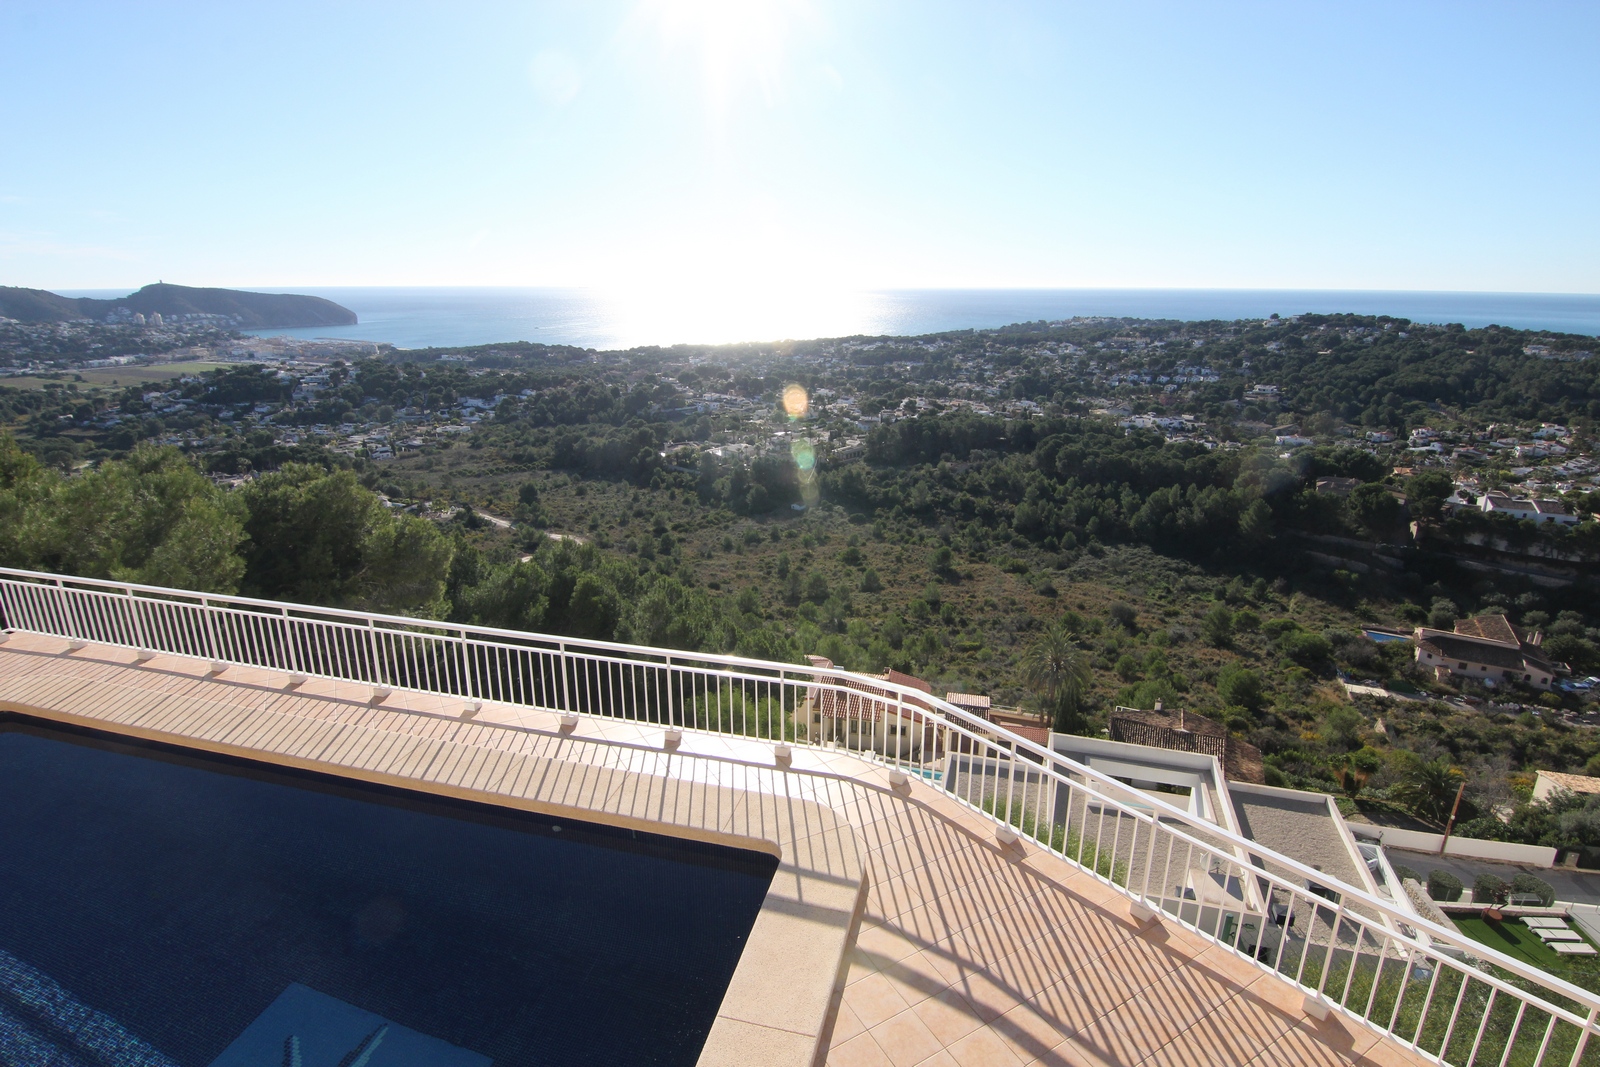 Villa for sale with stunning views, two plots and swimming pool.